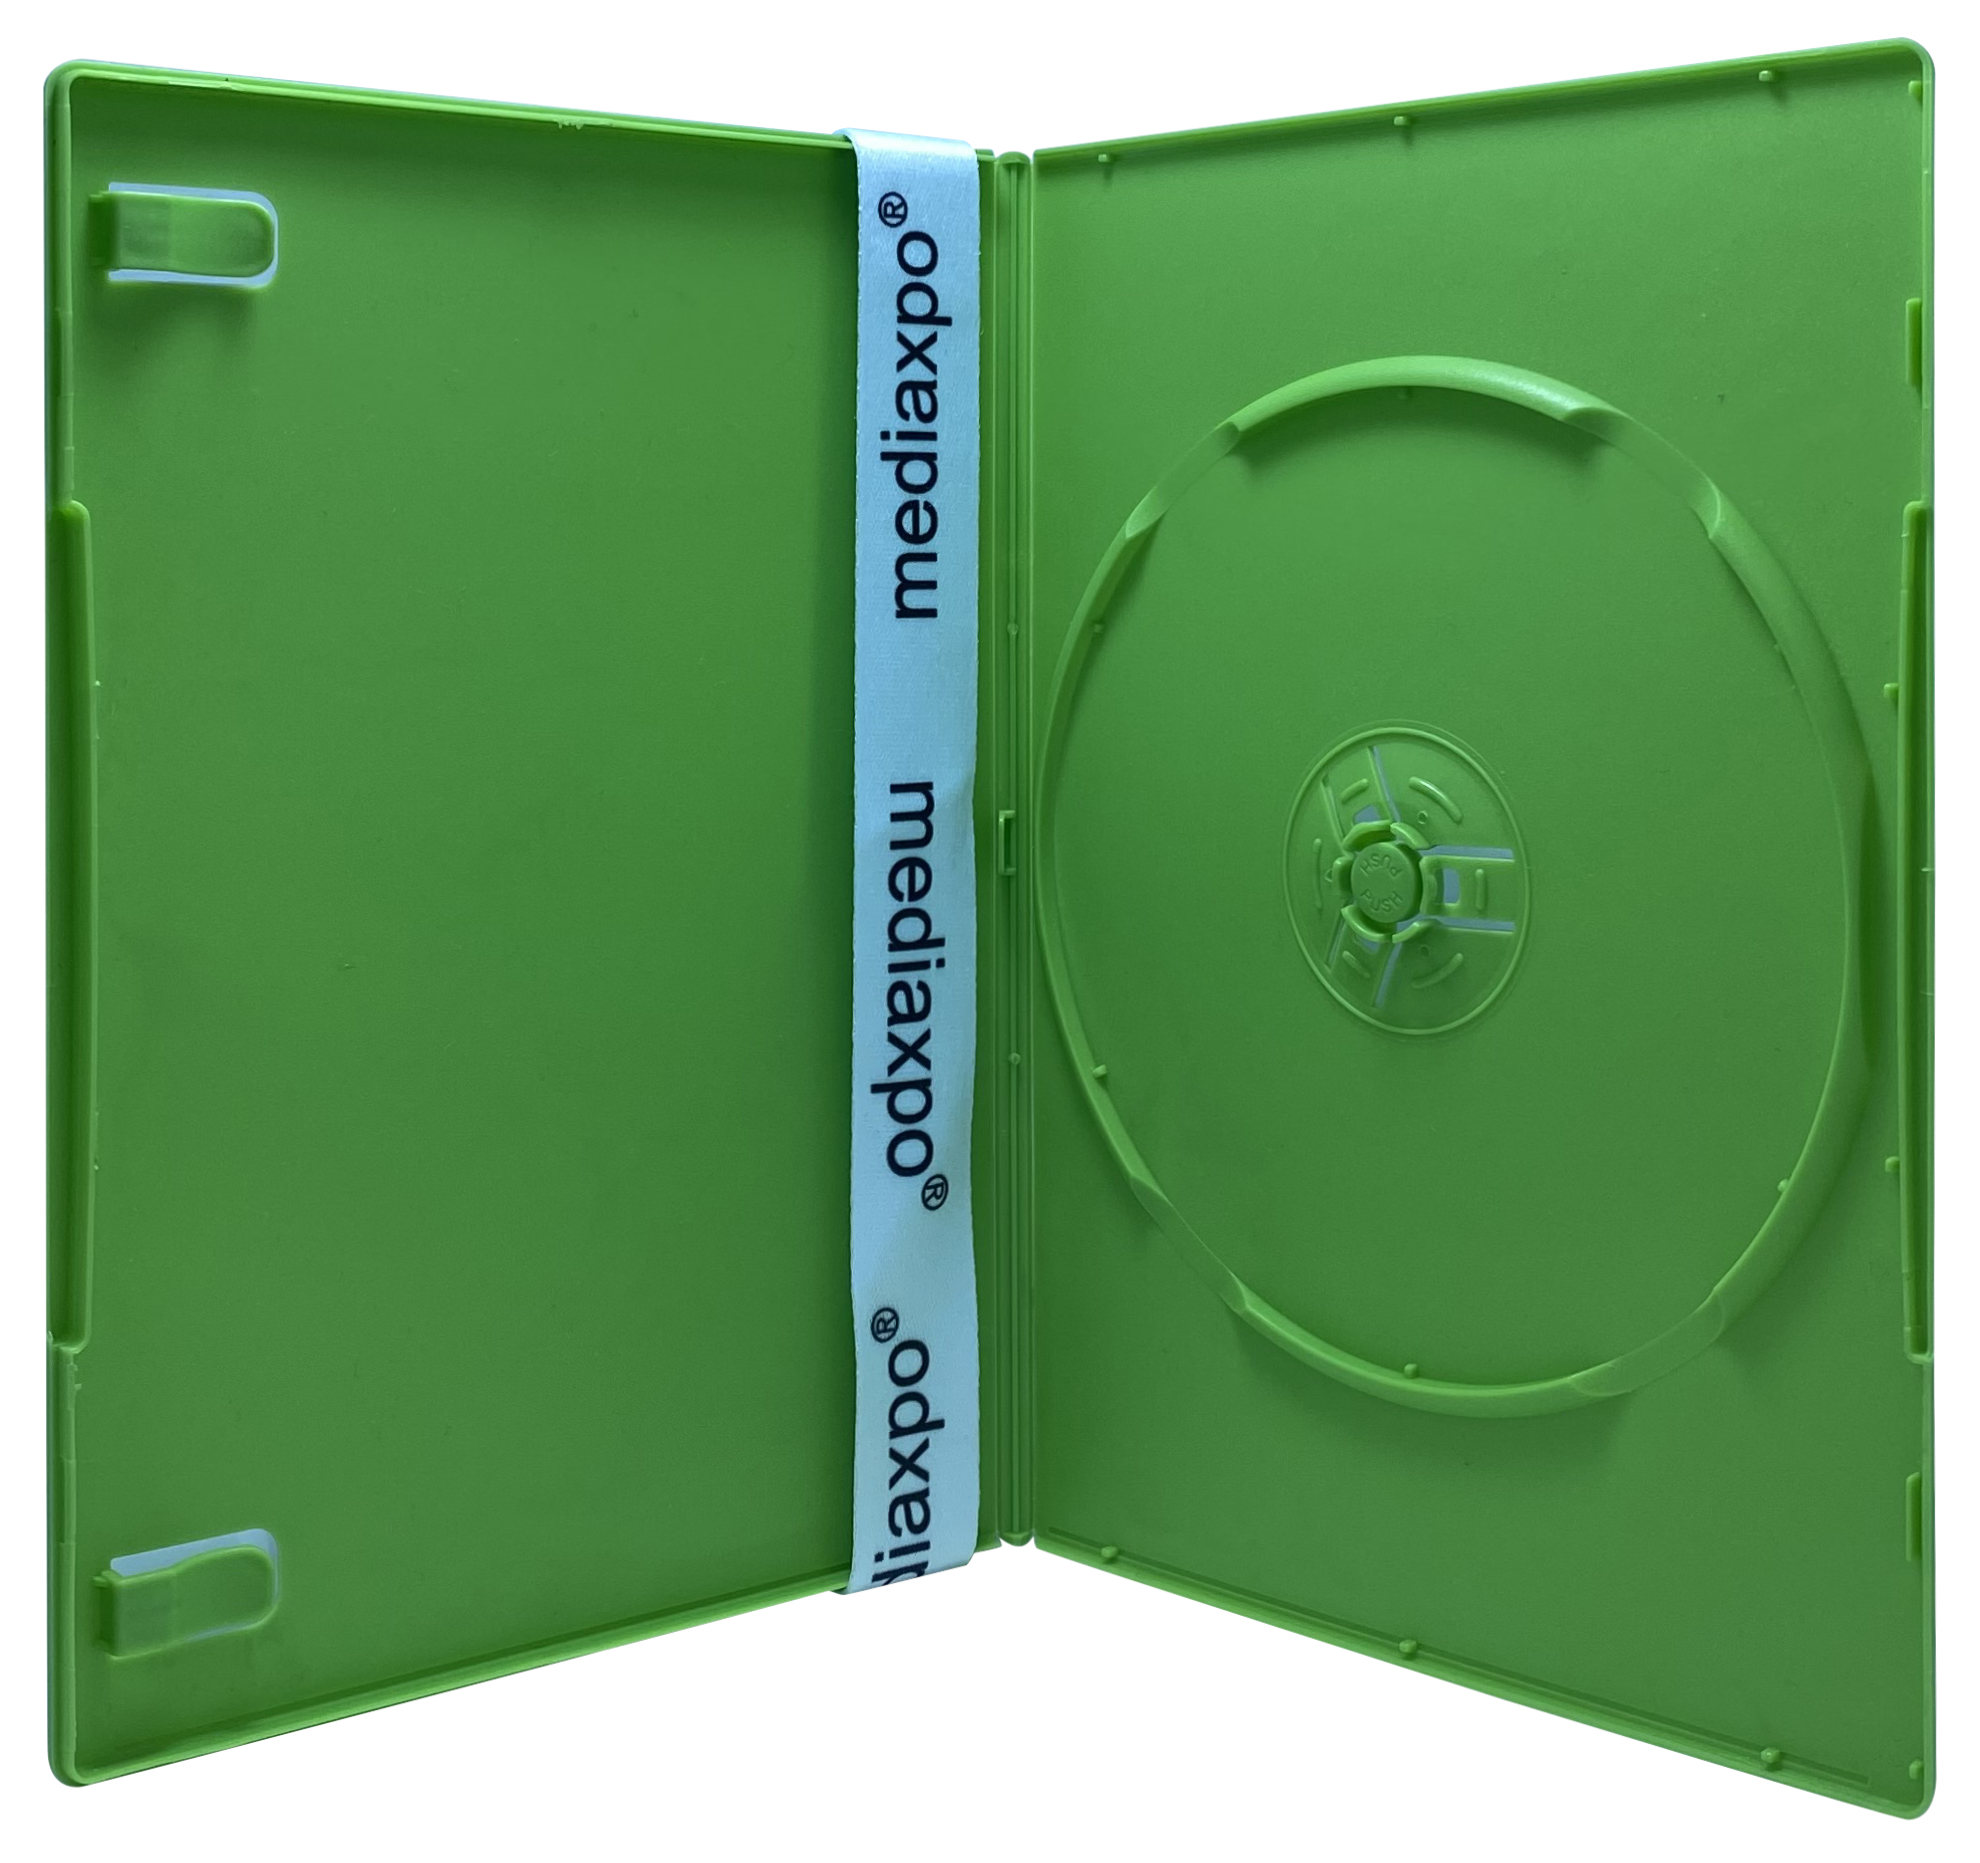 Generic 10 SLIM Solid Green Color Single DVD Cases 7MM